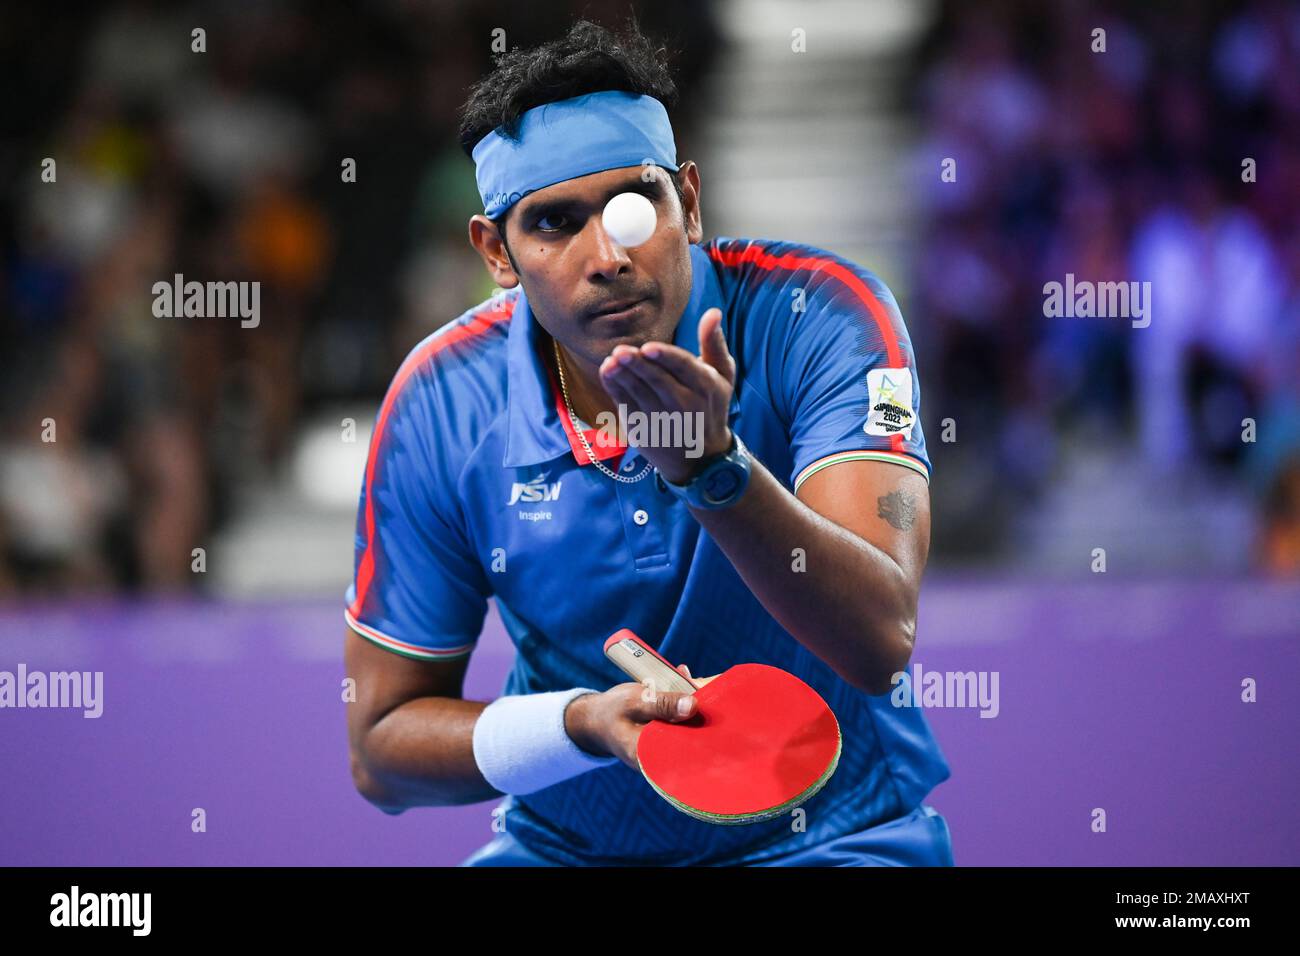 Sharath Kamal Achanta of India serves to Liam Pitchford of England in the mens singles table tennis gold medal match at the Commonwealth Games in Birmingham in Birmingham, England, Monday, Aug